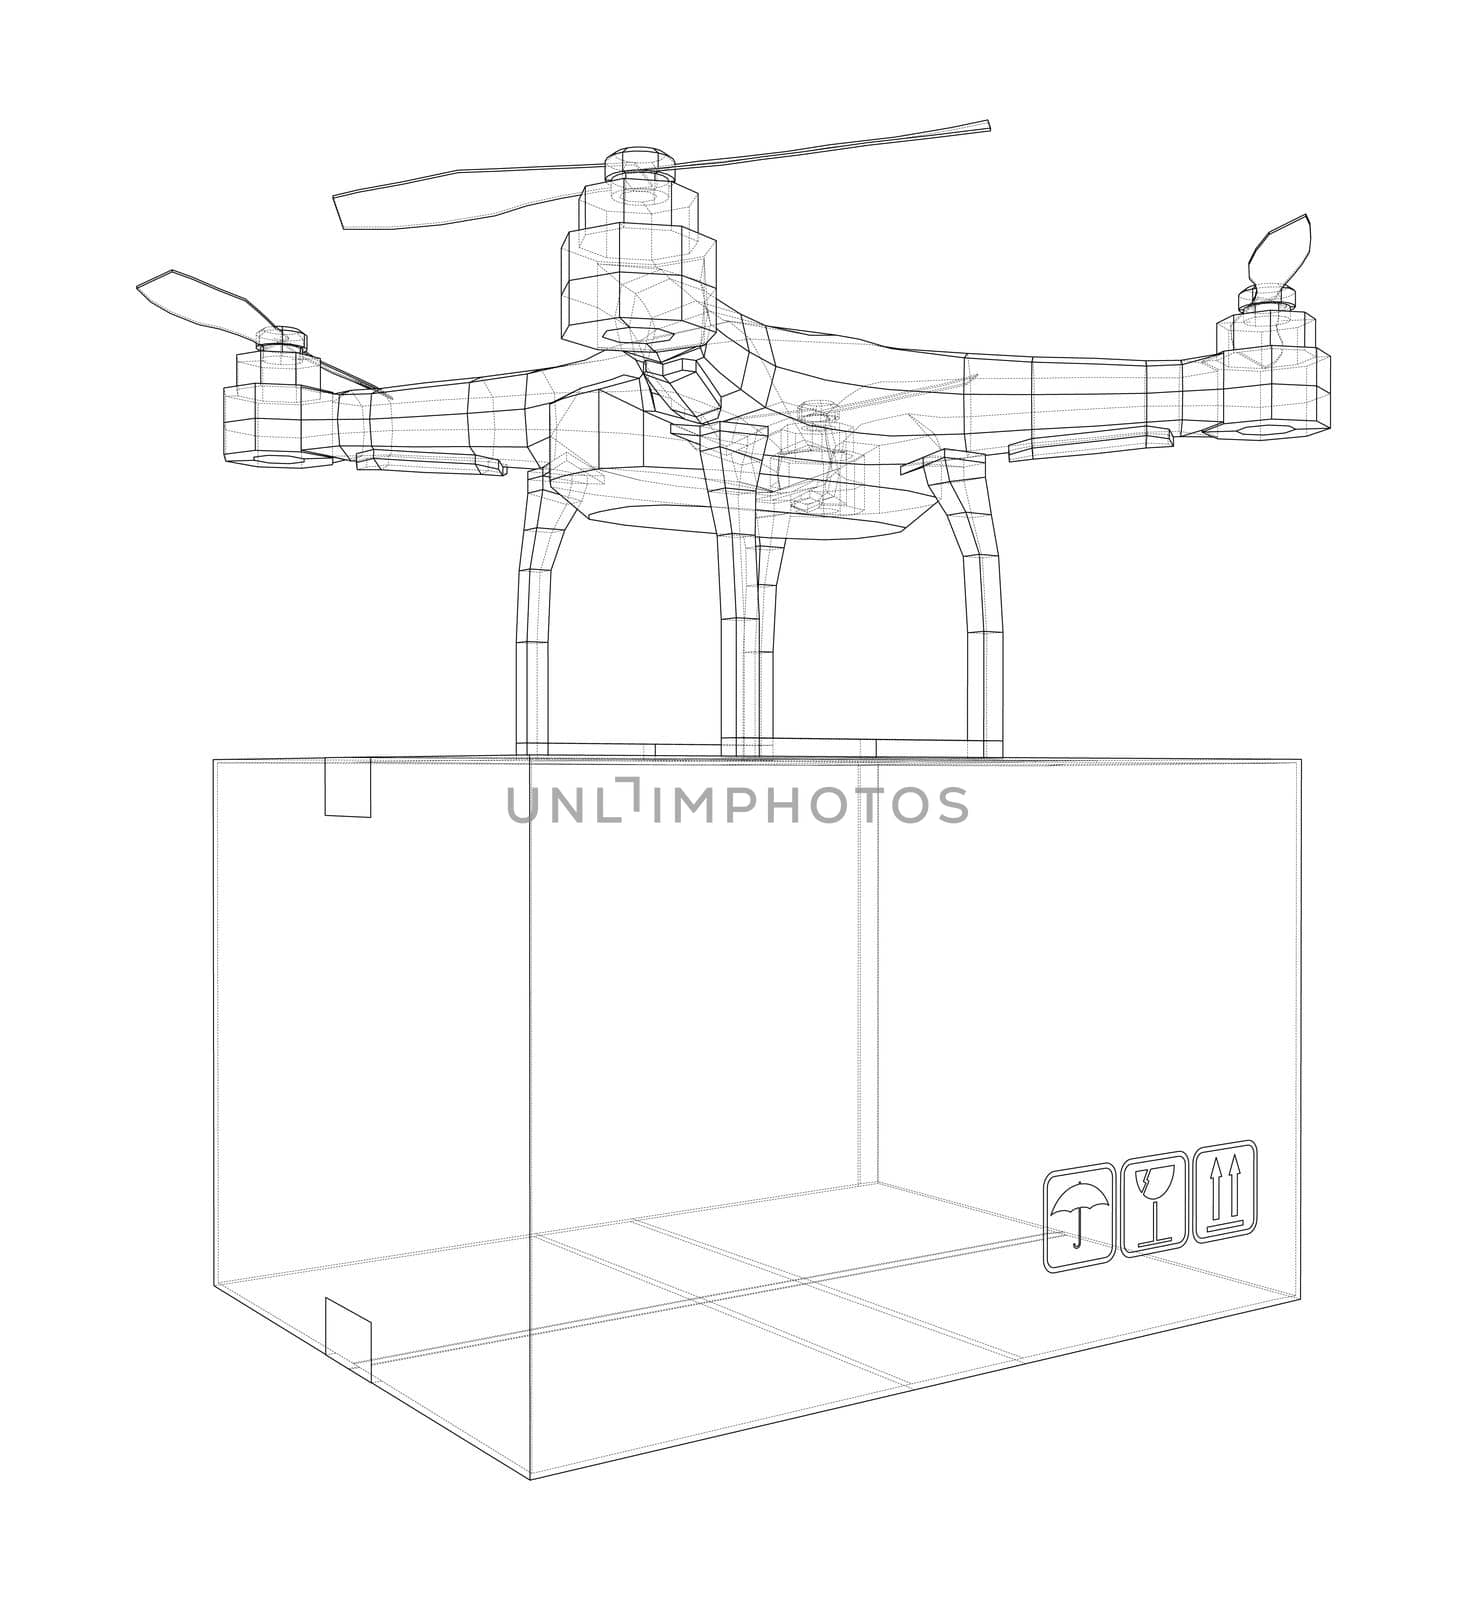 Delivery drone concept outline. 3d illustration. Wire-frame style